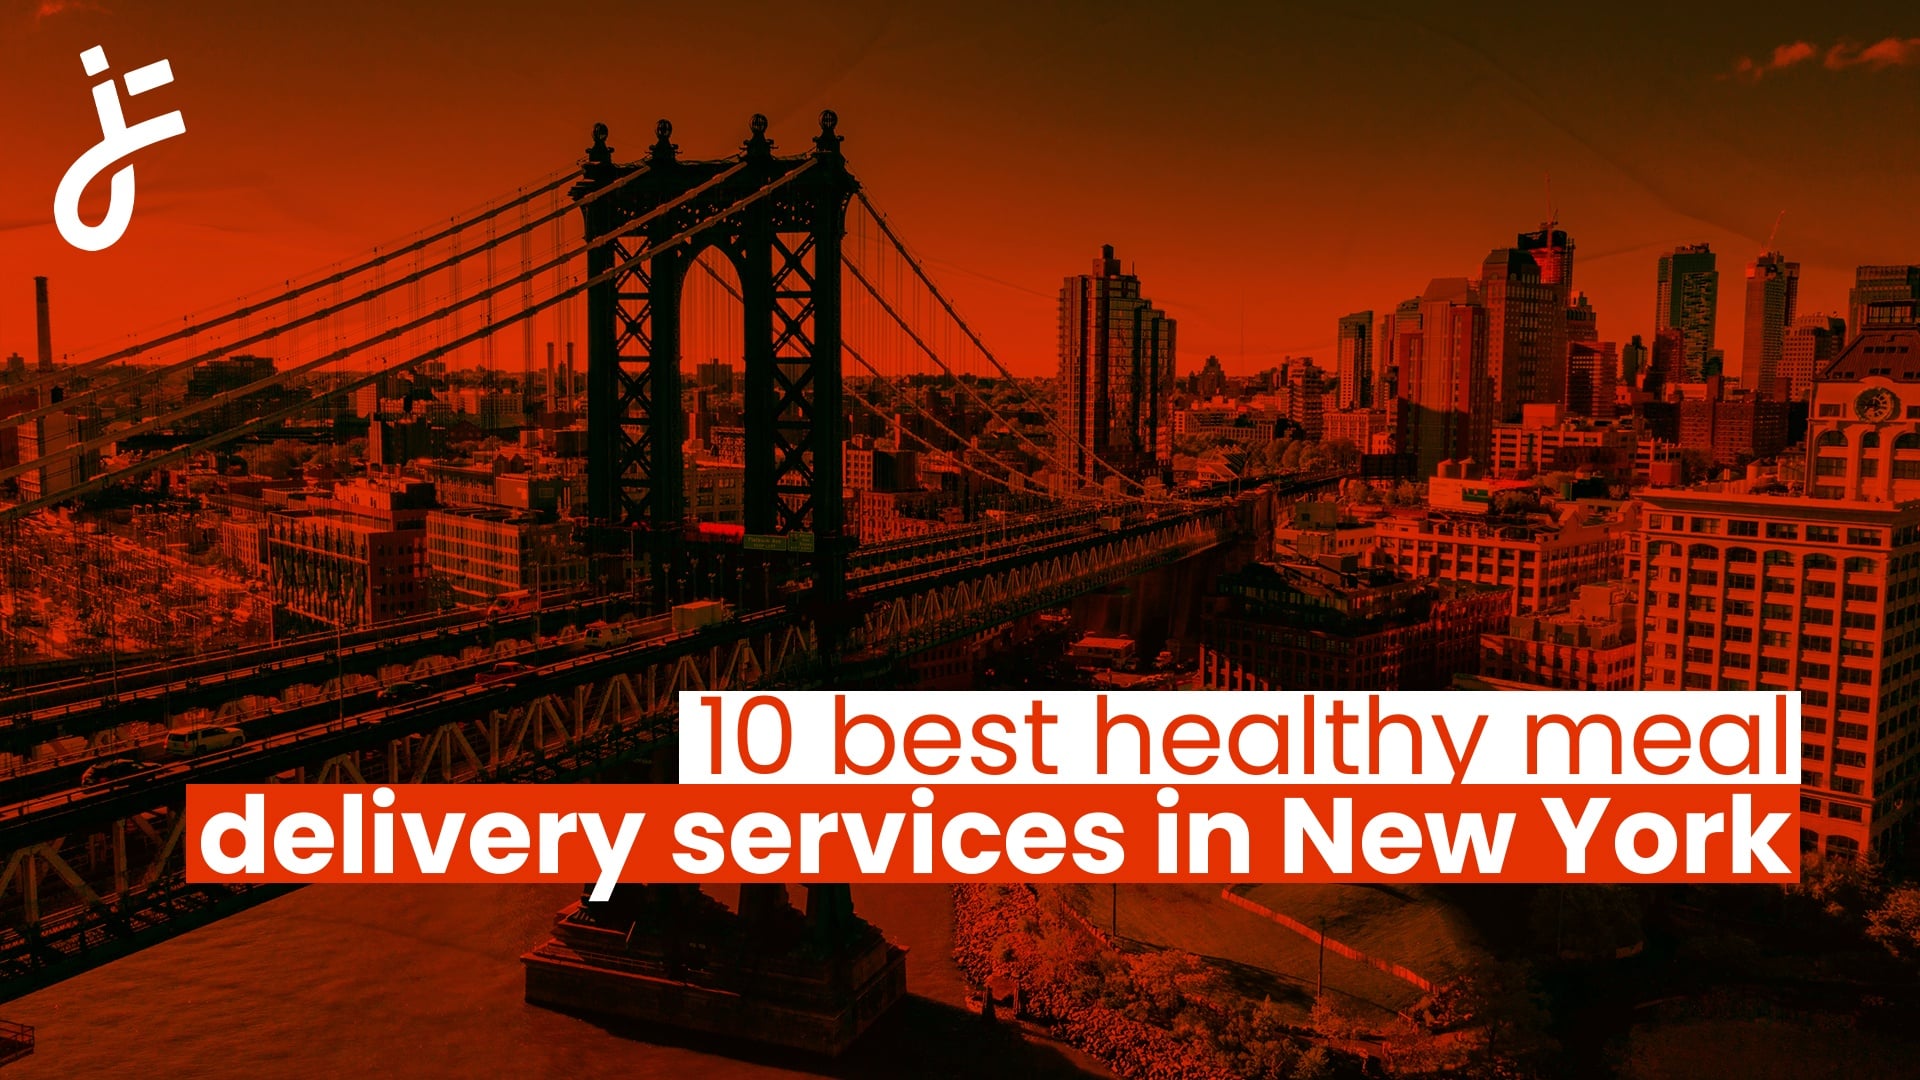 10 best healthy meal delivery services in New York